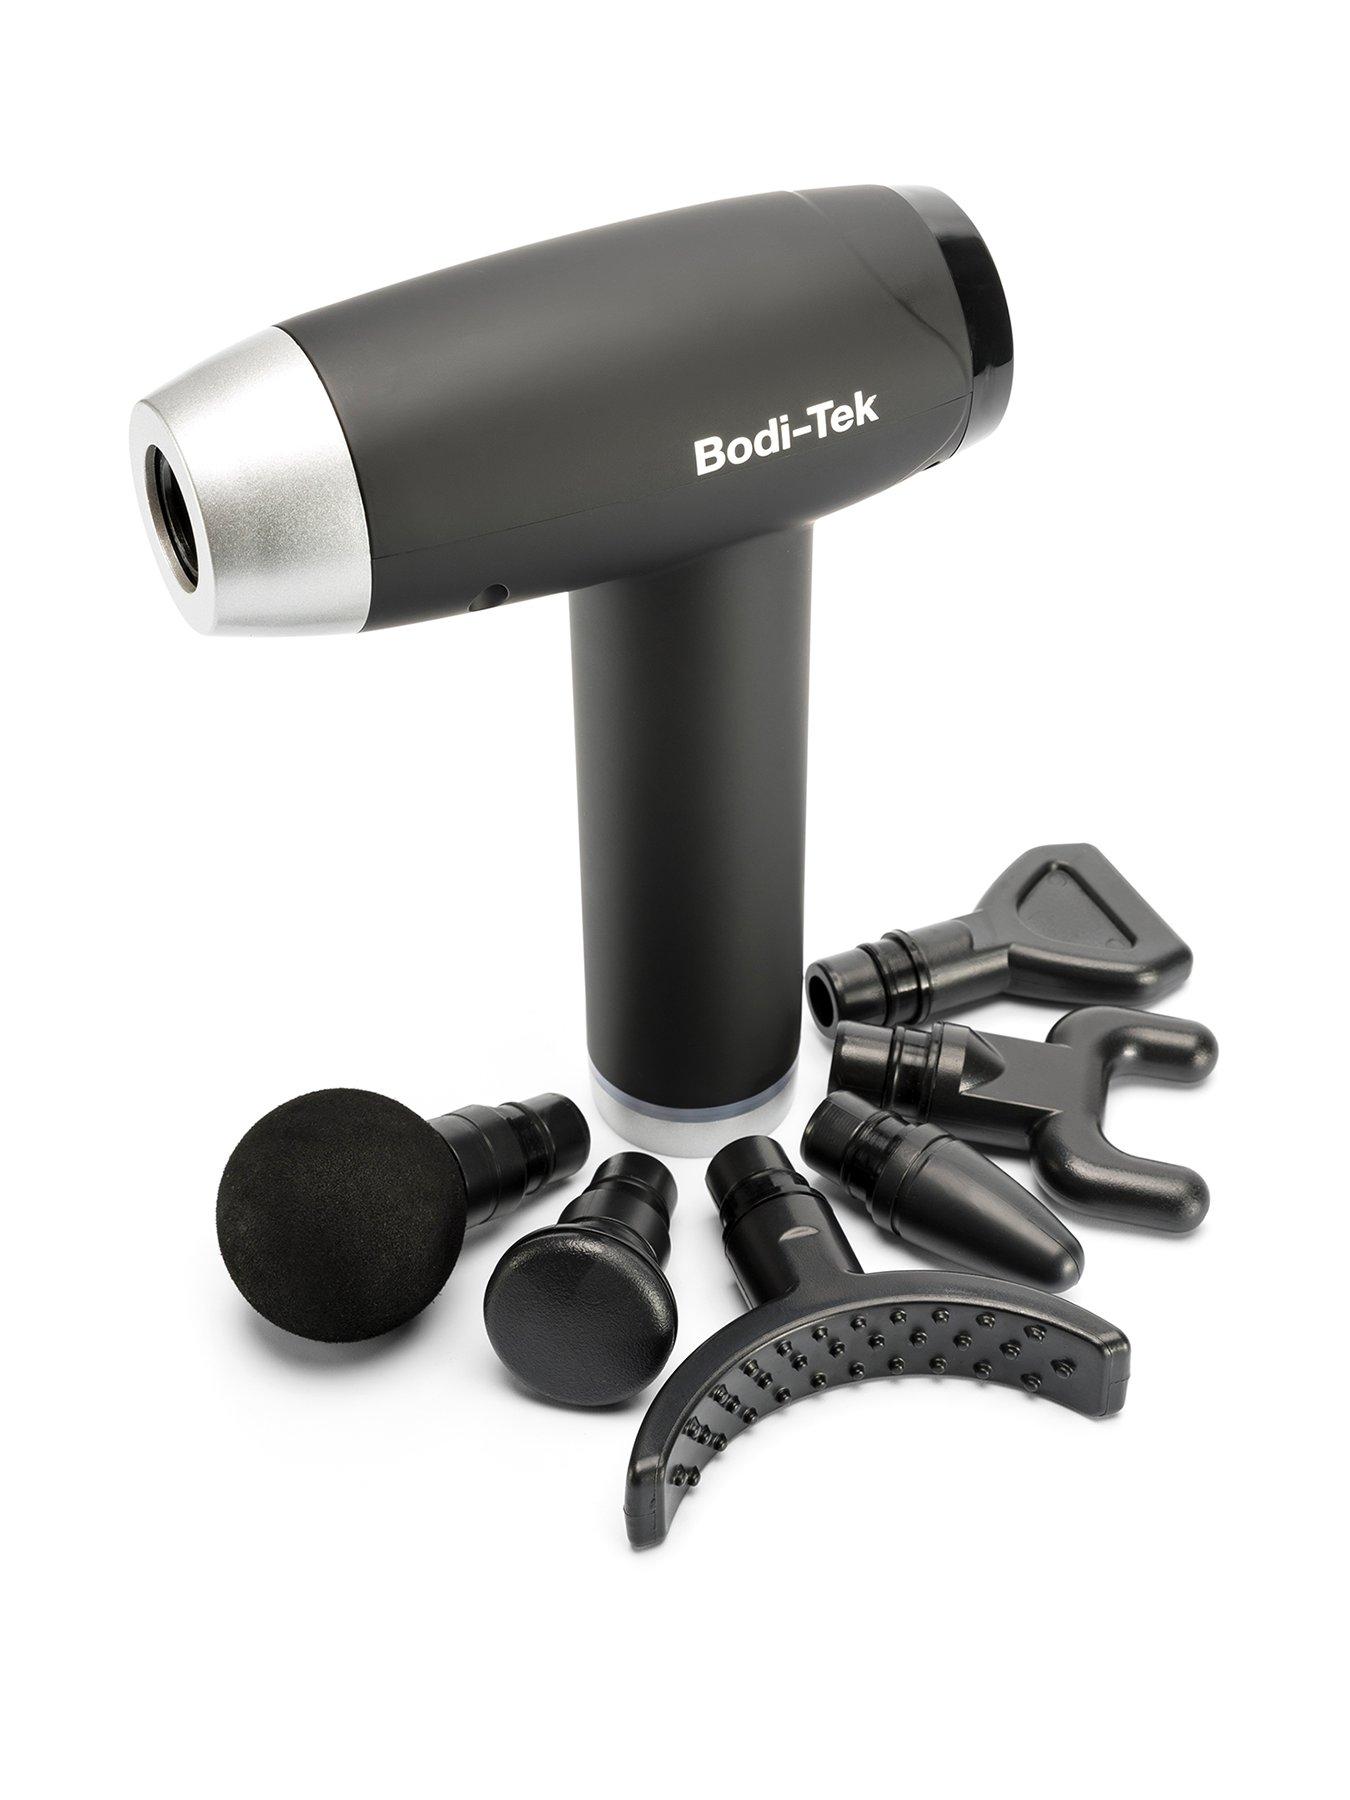 Is a Black and Decker Polisher the Ultimate Cheap Self Massage Tool? 